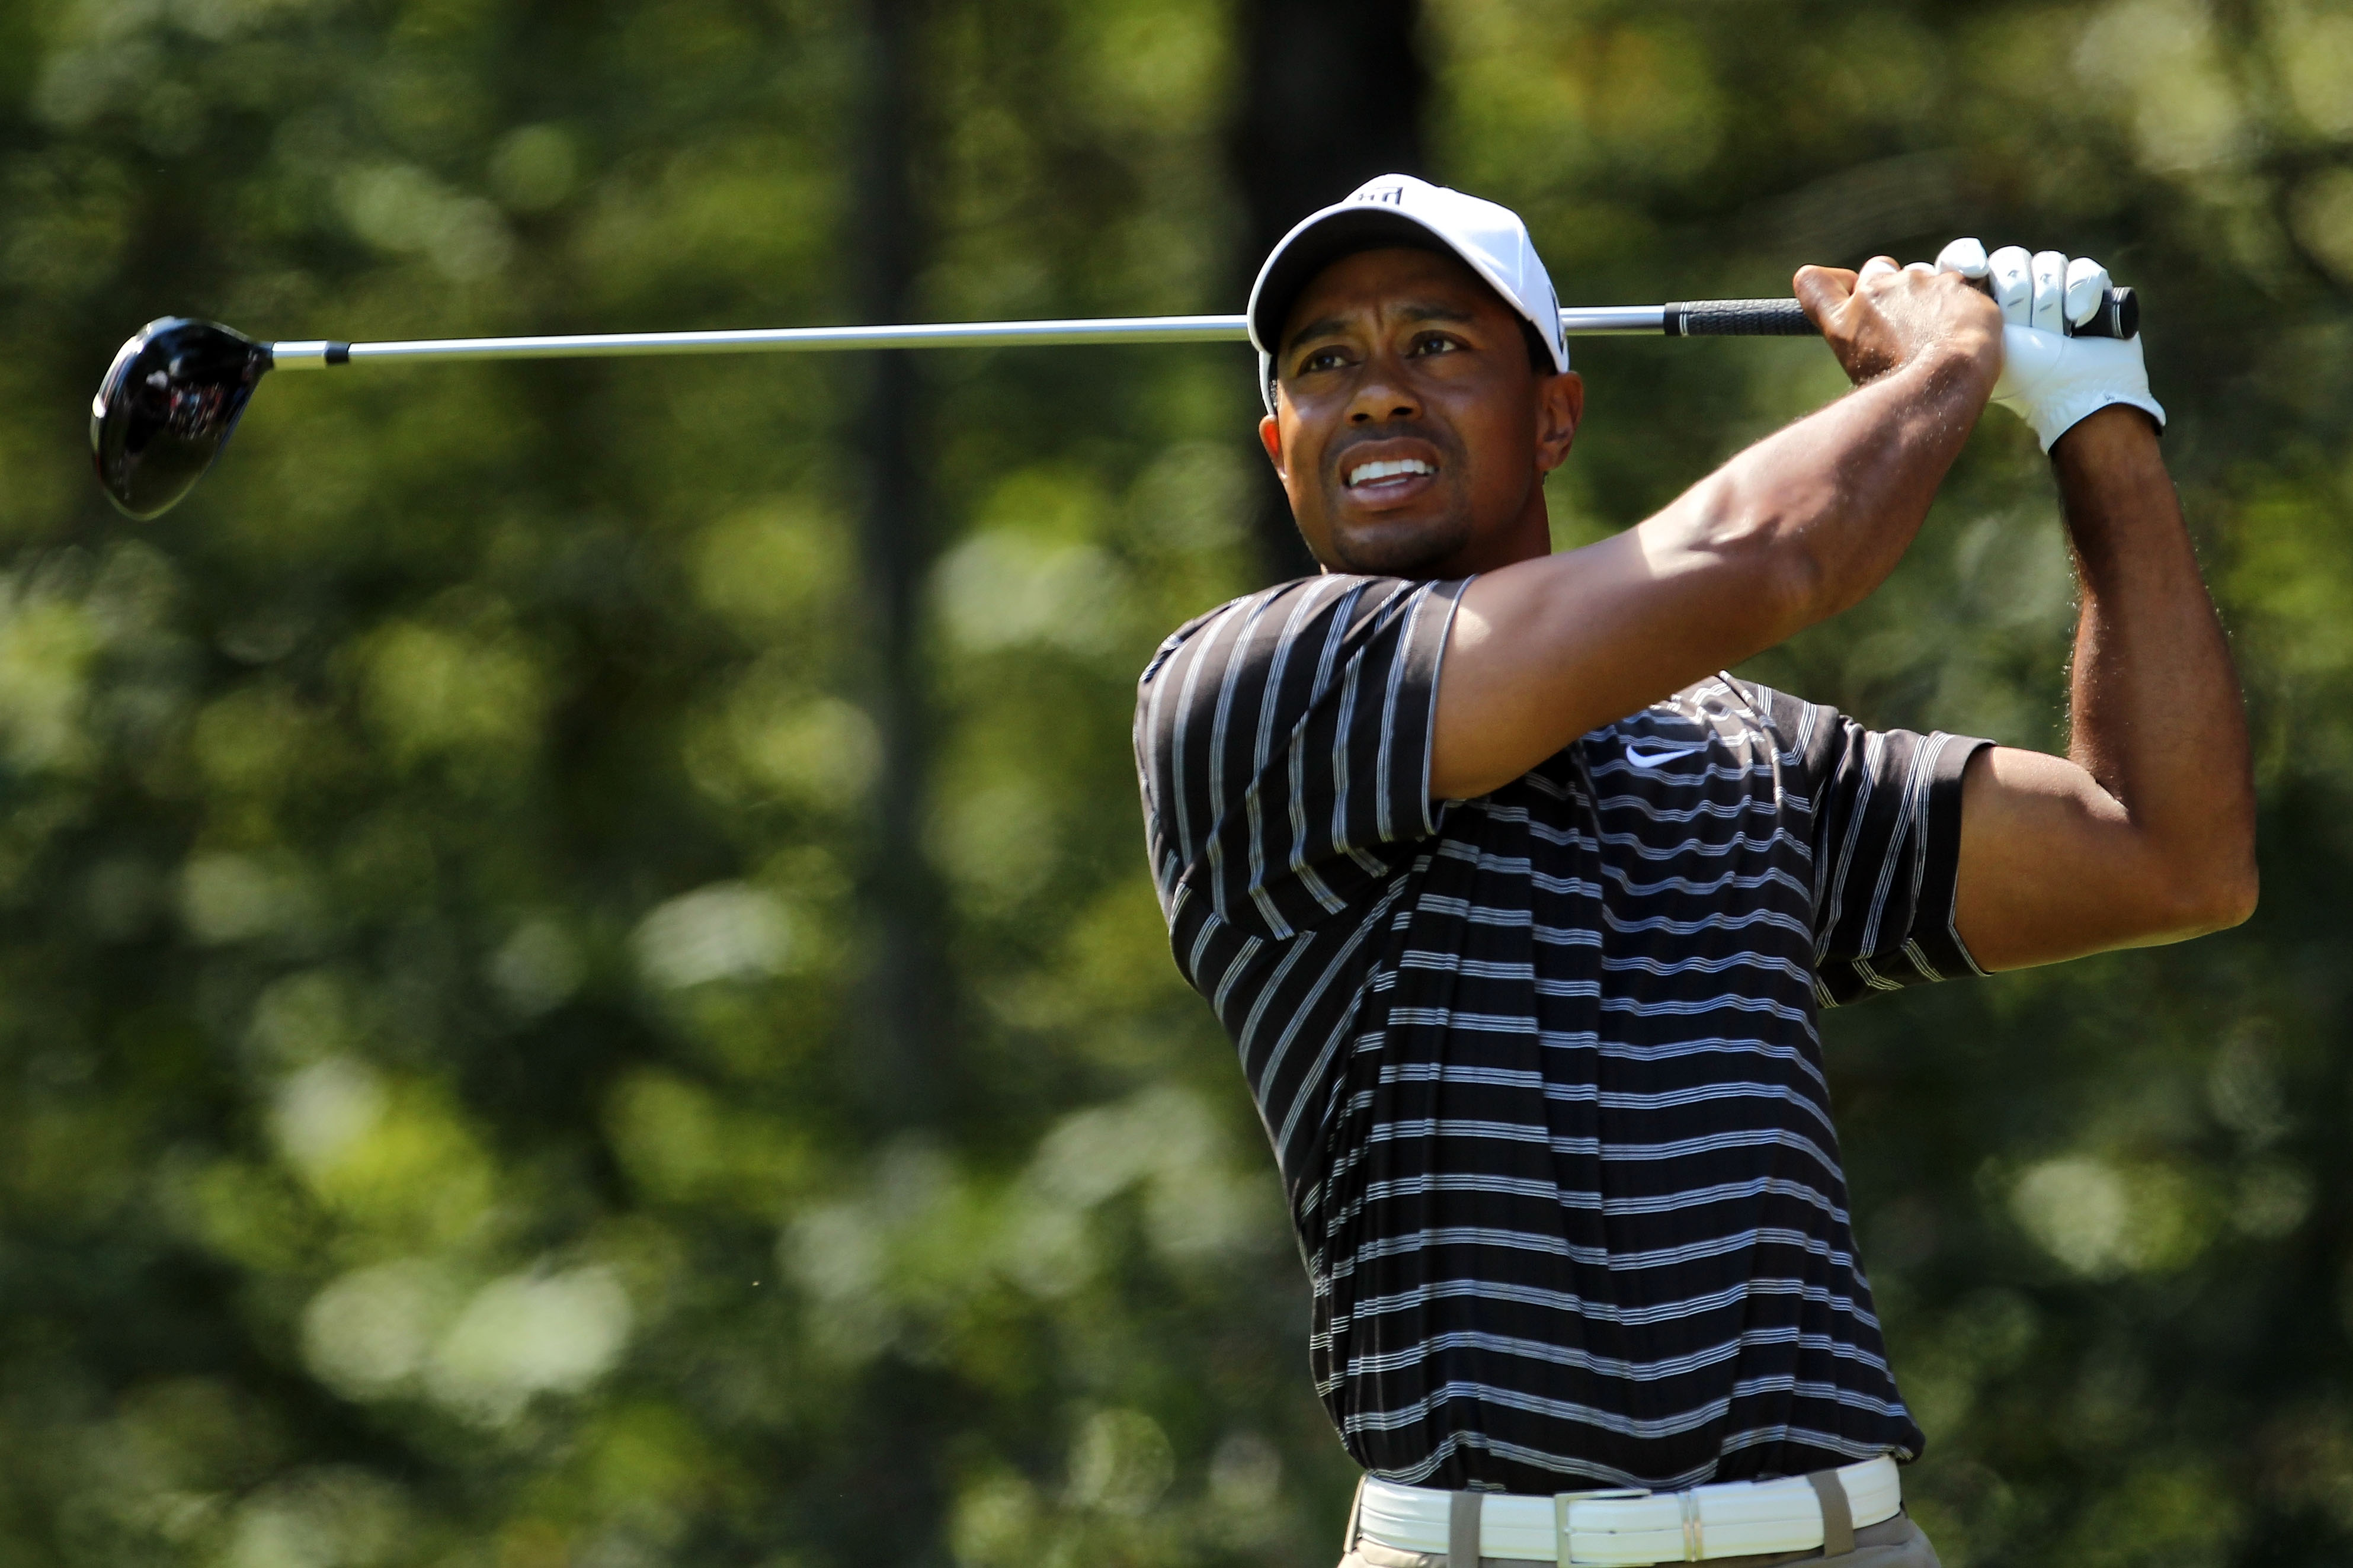 NORTON, MA - SEPTEMBER 05:  Tiger Woods tees off on the second hole during the third round of the Deutsche Bank Championship at TPC Boston on September 5, 2010 in Norton, Massachusetts.  (Photo by Mike Ehrmann/Getty Images)